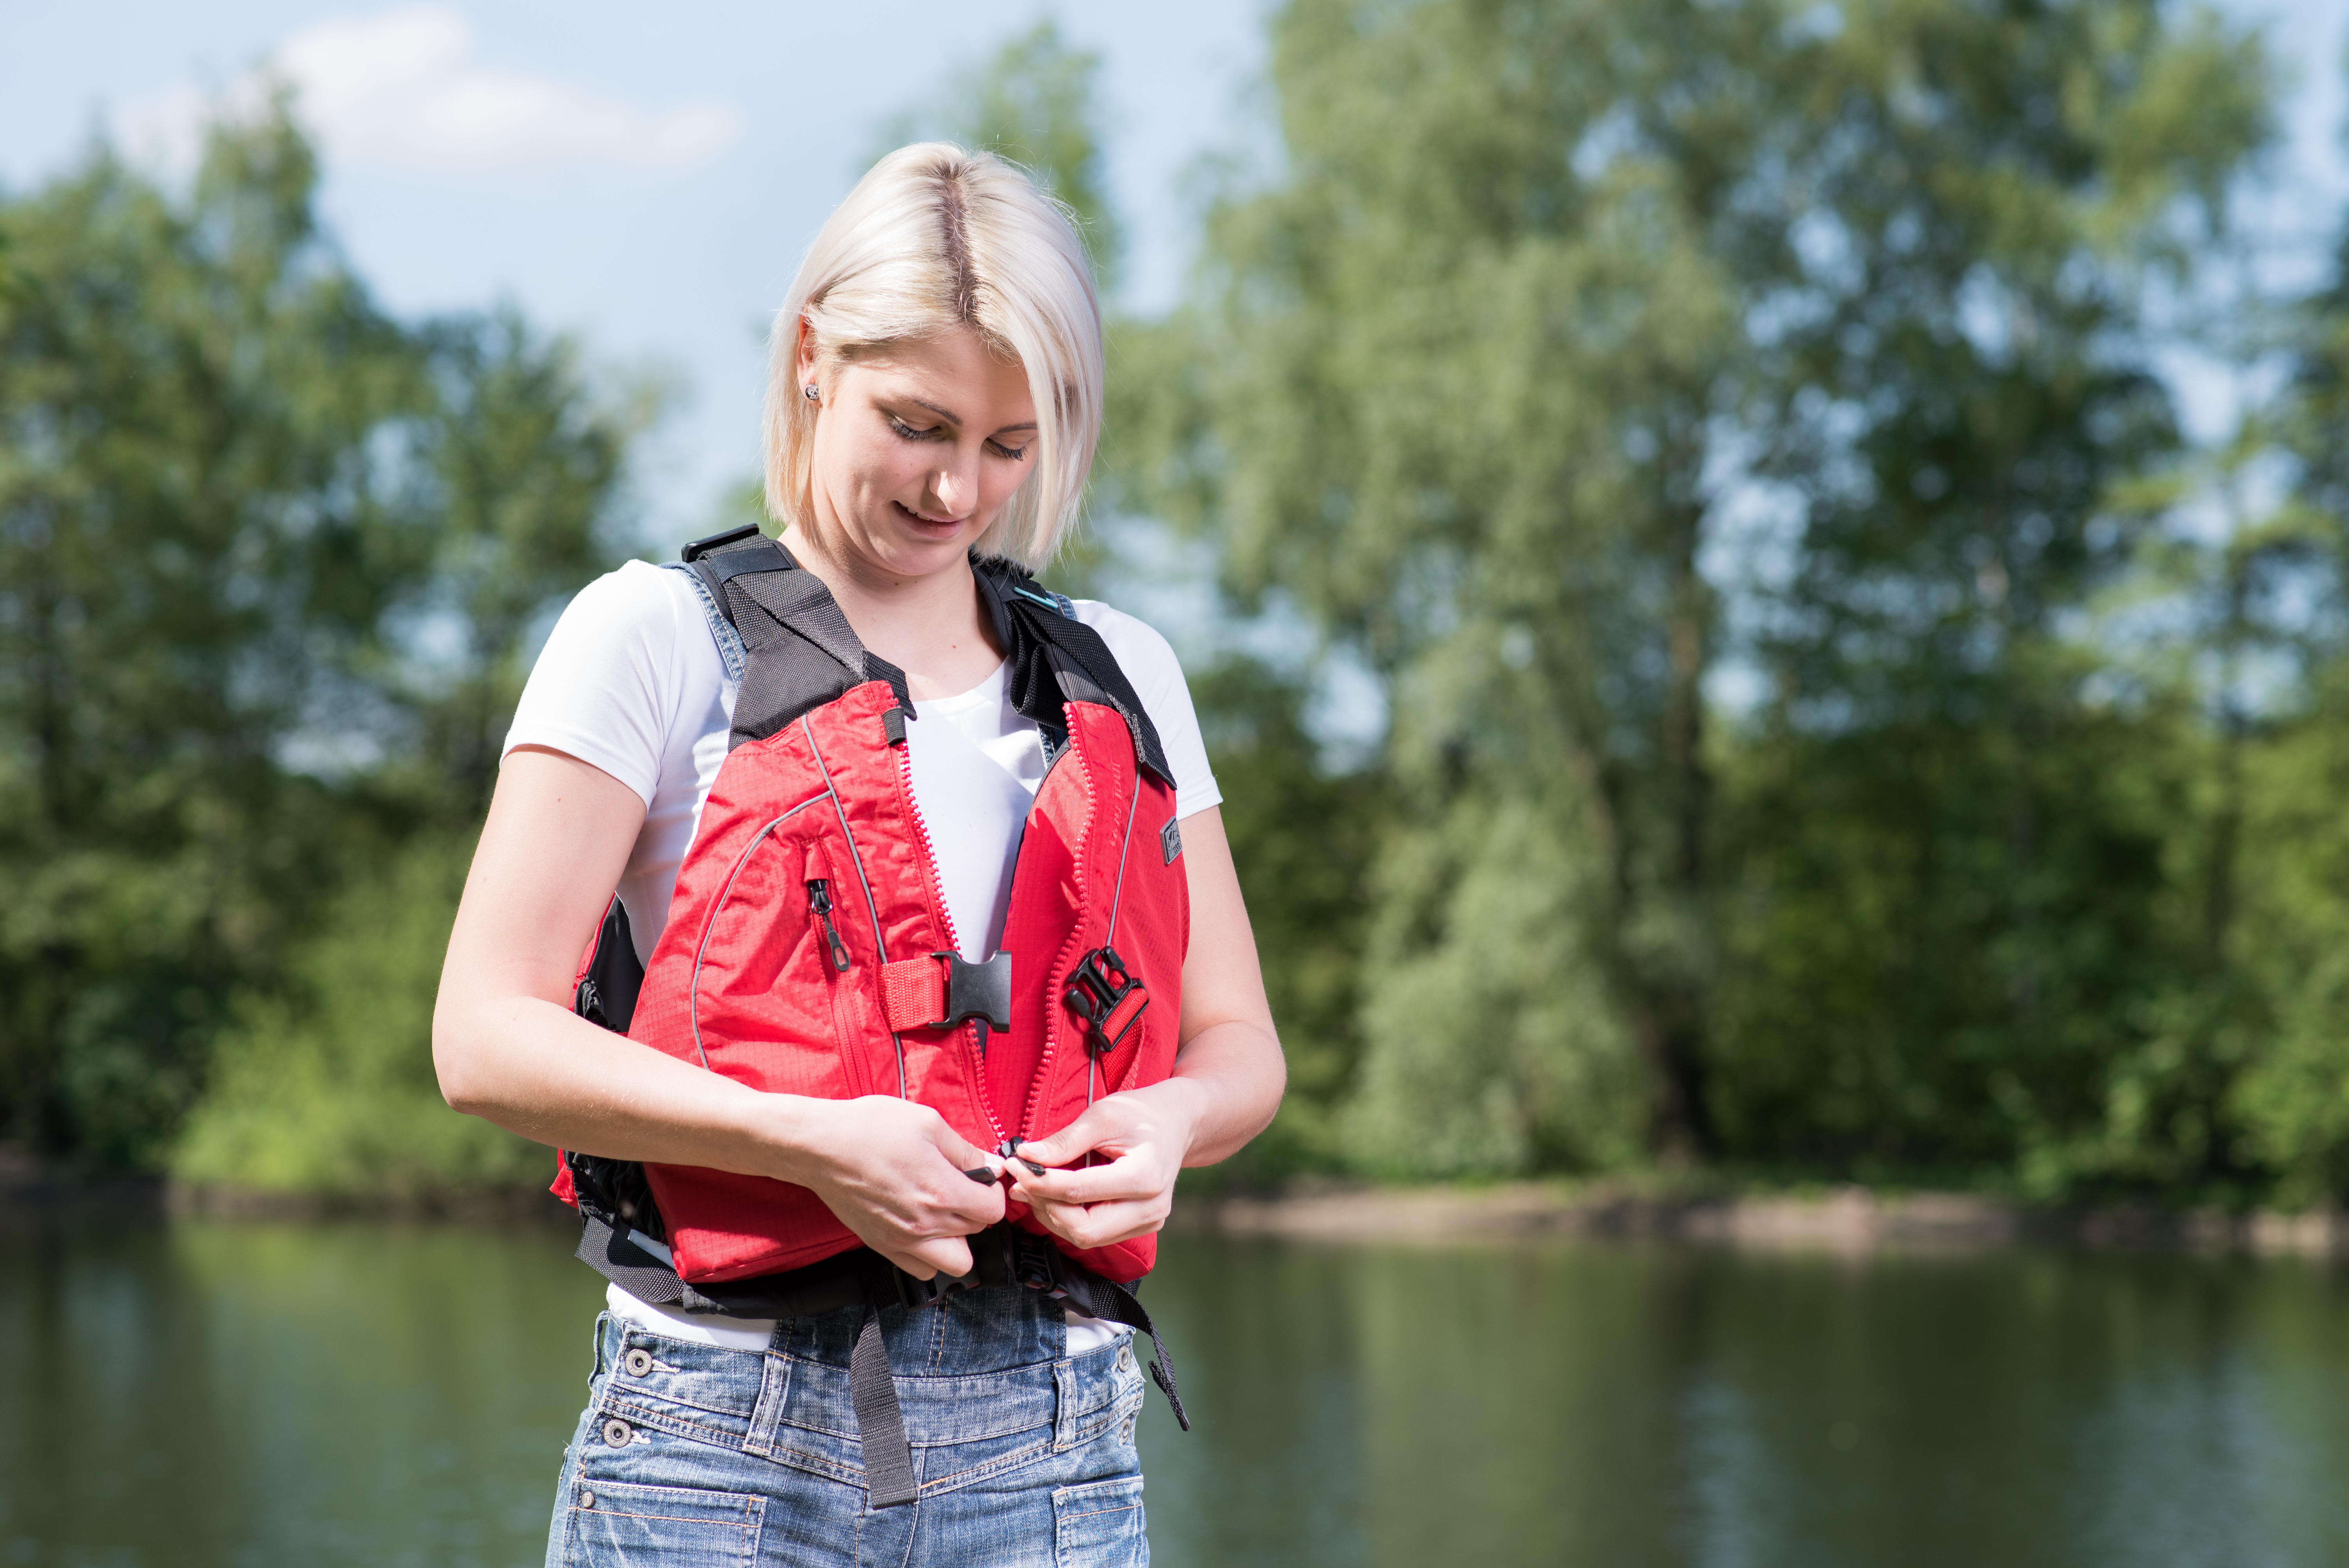 A woman fastens a life jacket, safe boating concept. 